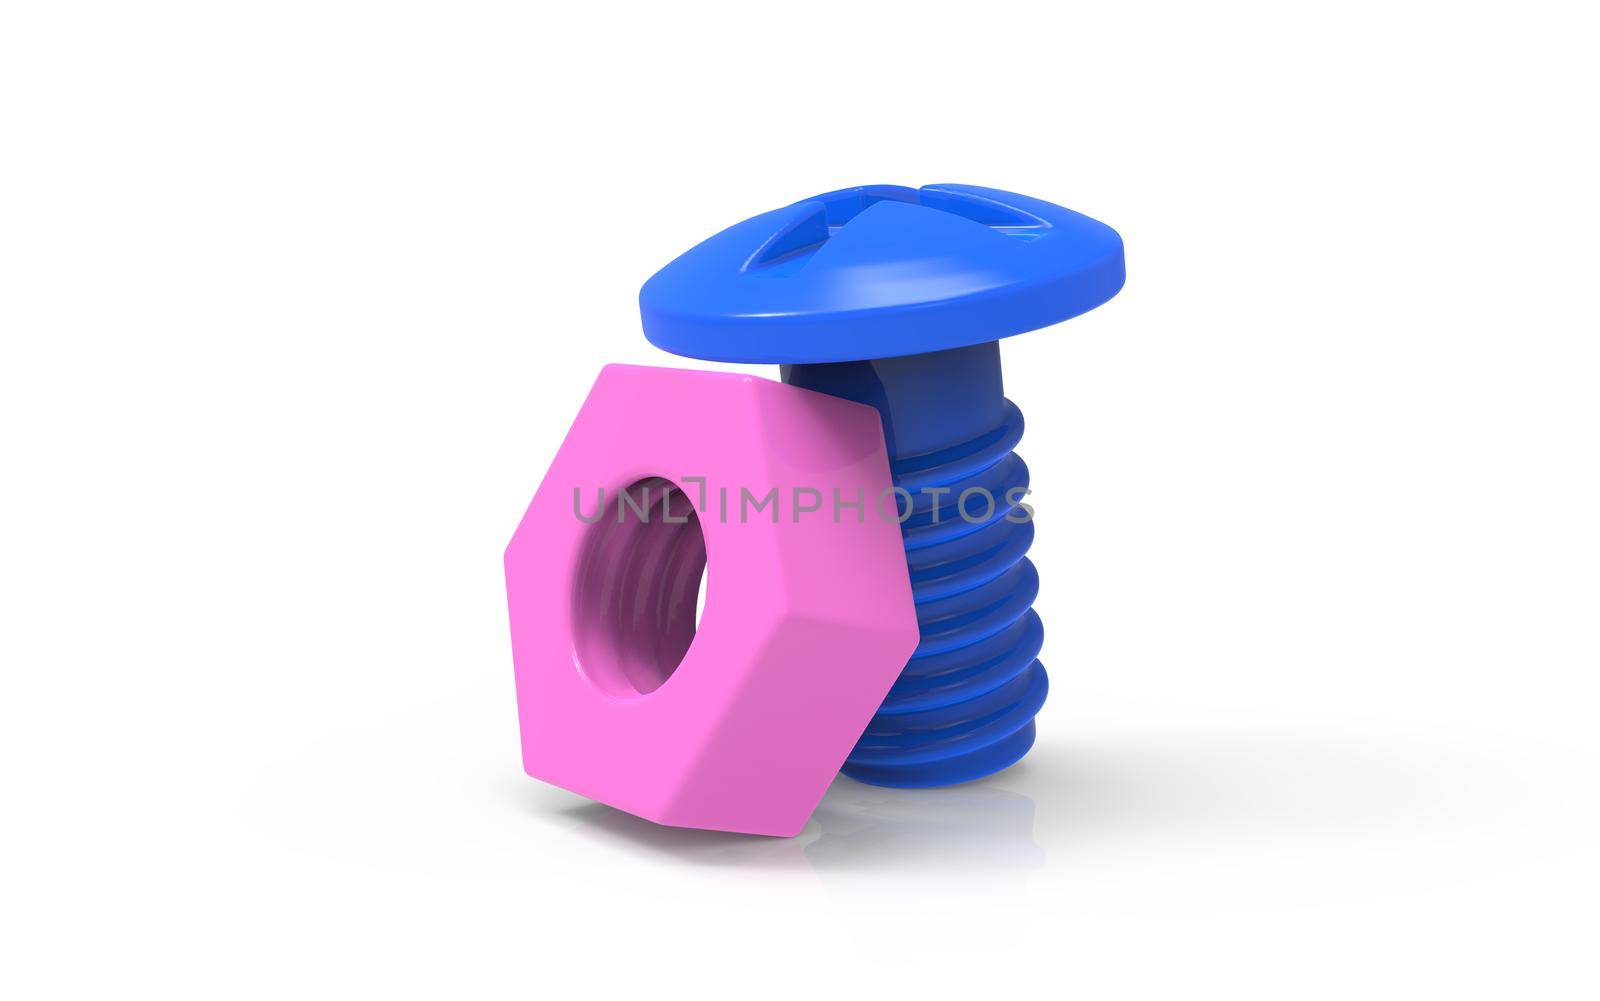 Plastic toy blue screw and pink nut couple. Male and female relations symbol. 3D illustration rendering